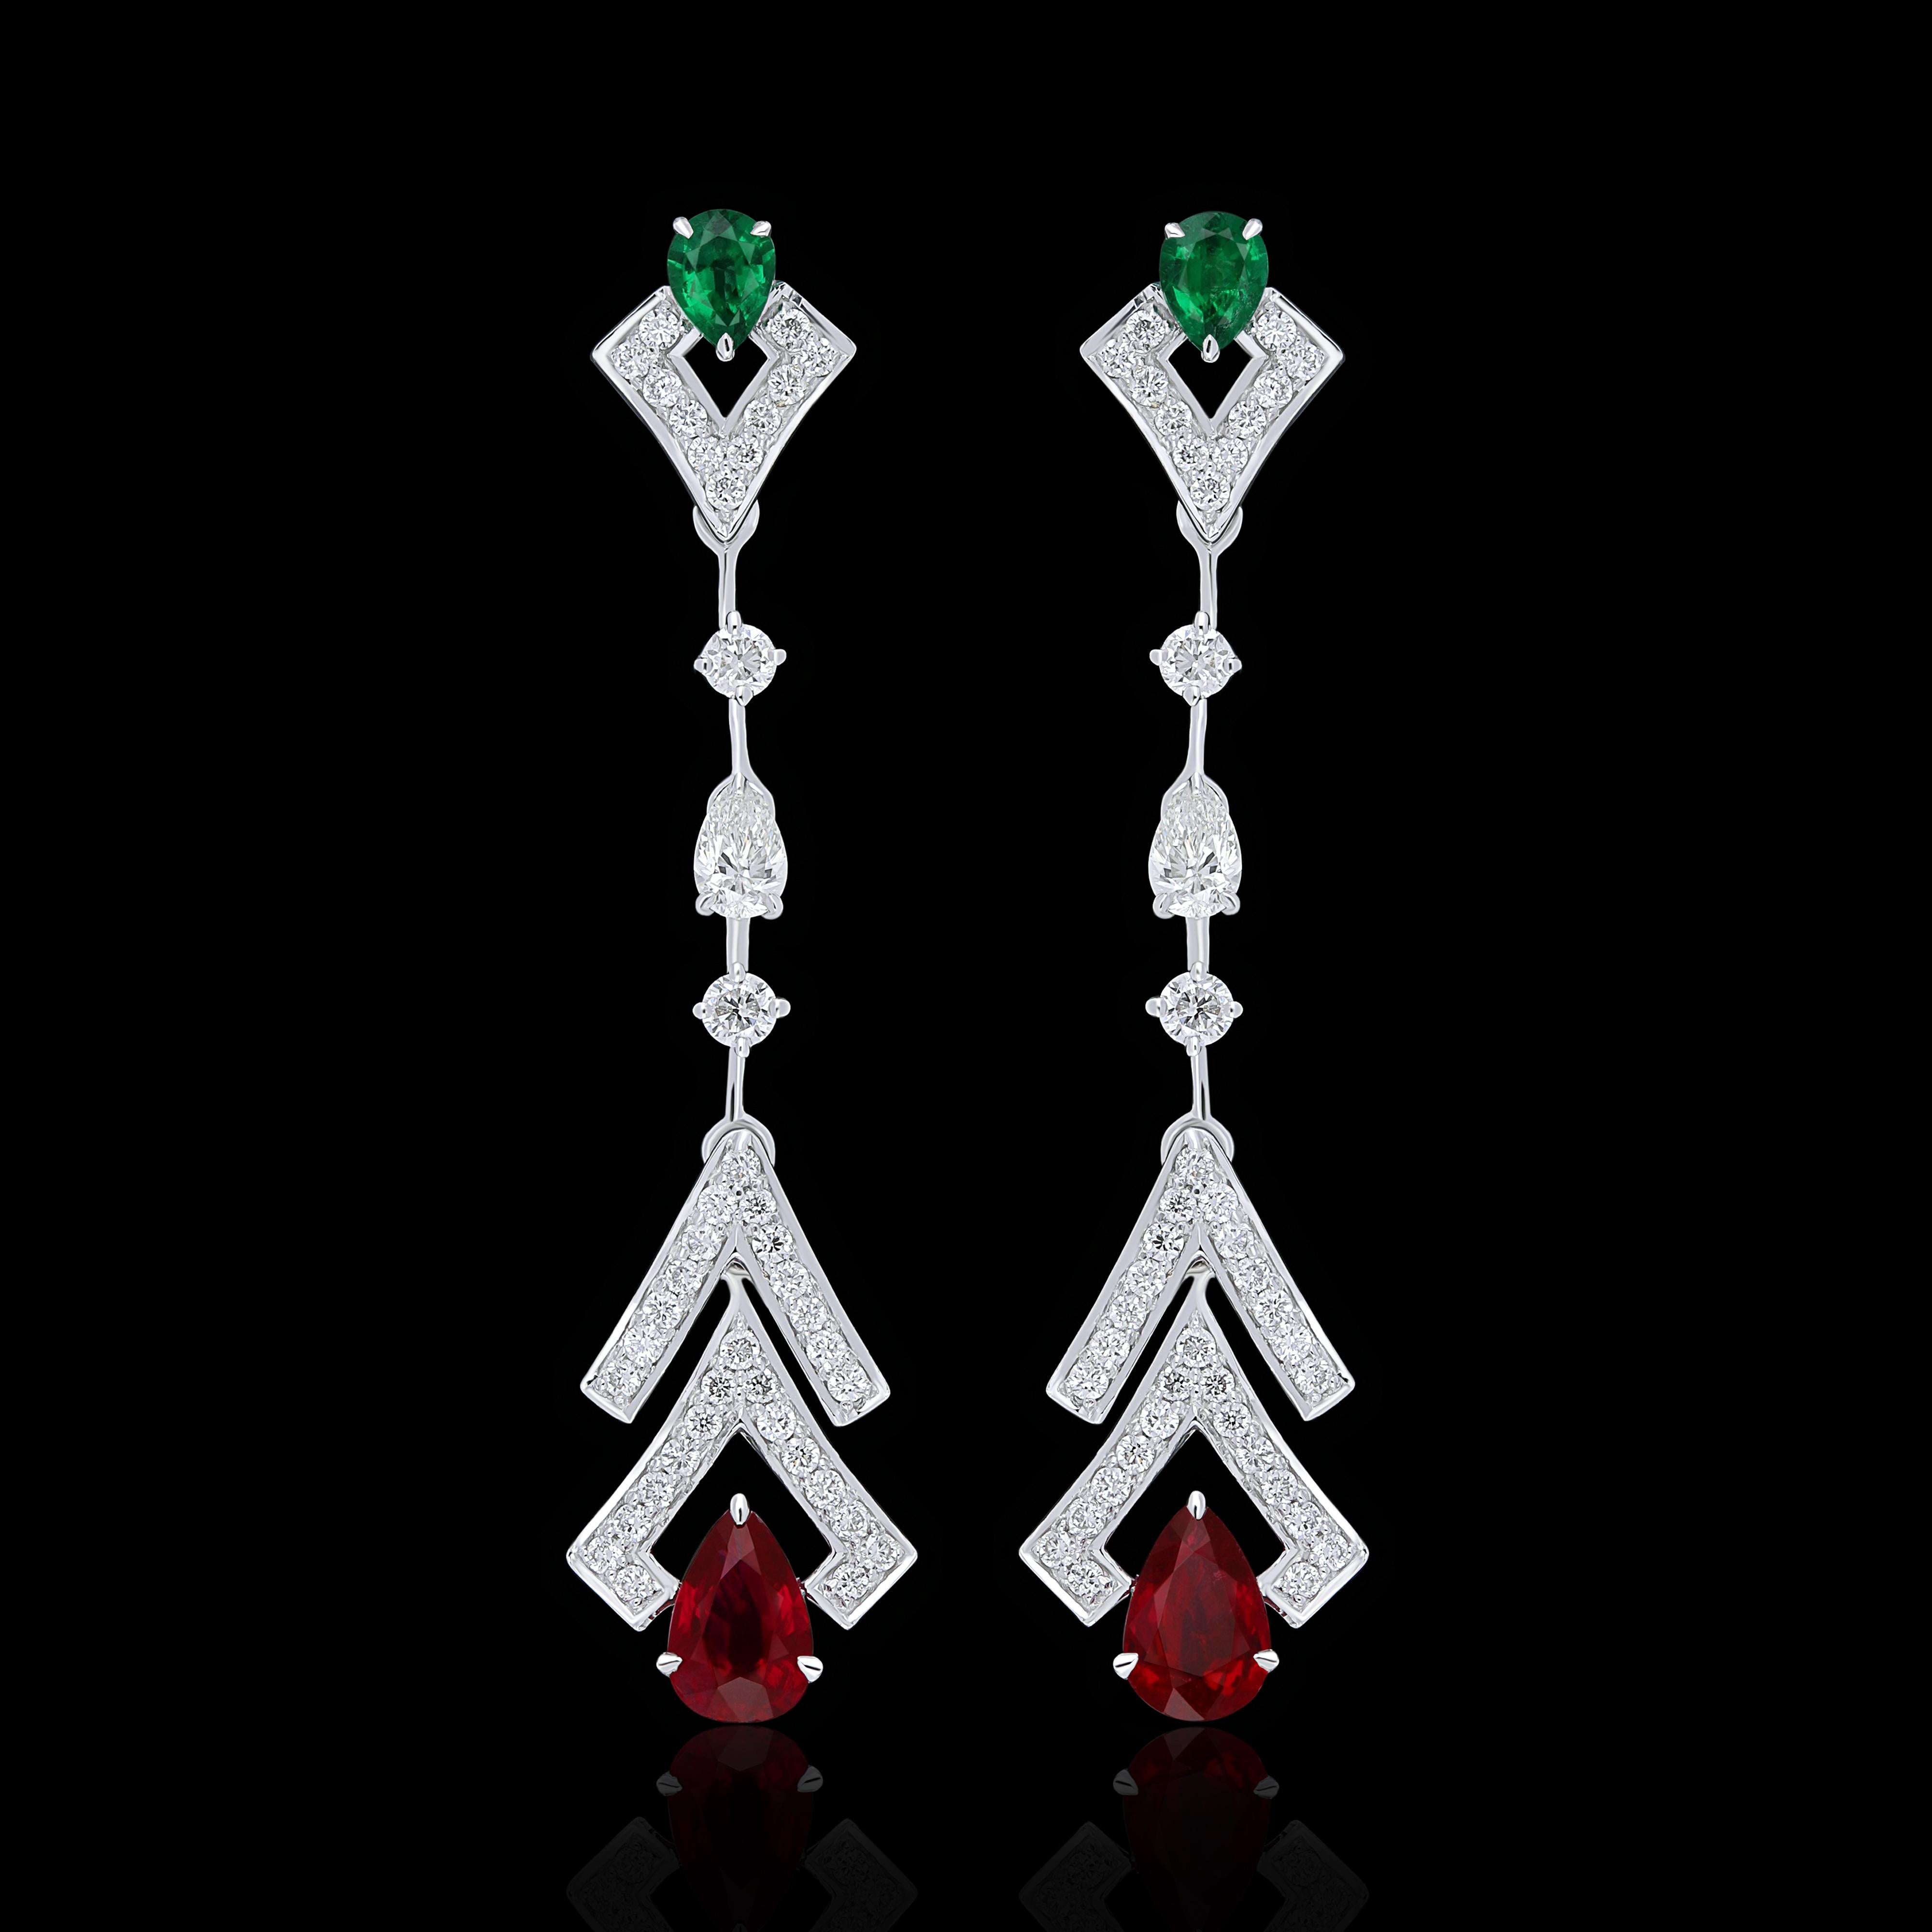 Elegant and exquisitely detailed 18 Karat White Gold Earring, center set with 0.74Cts .Pear Shape Ruby Mozambique with contrast of 0.23 Cts Emerald accented with micro pave set Diamonds, weighing approx. 0.73Cts Beautifully Hand crafted in 18 Karat